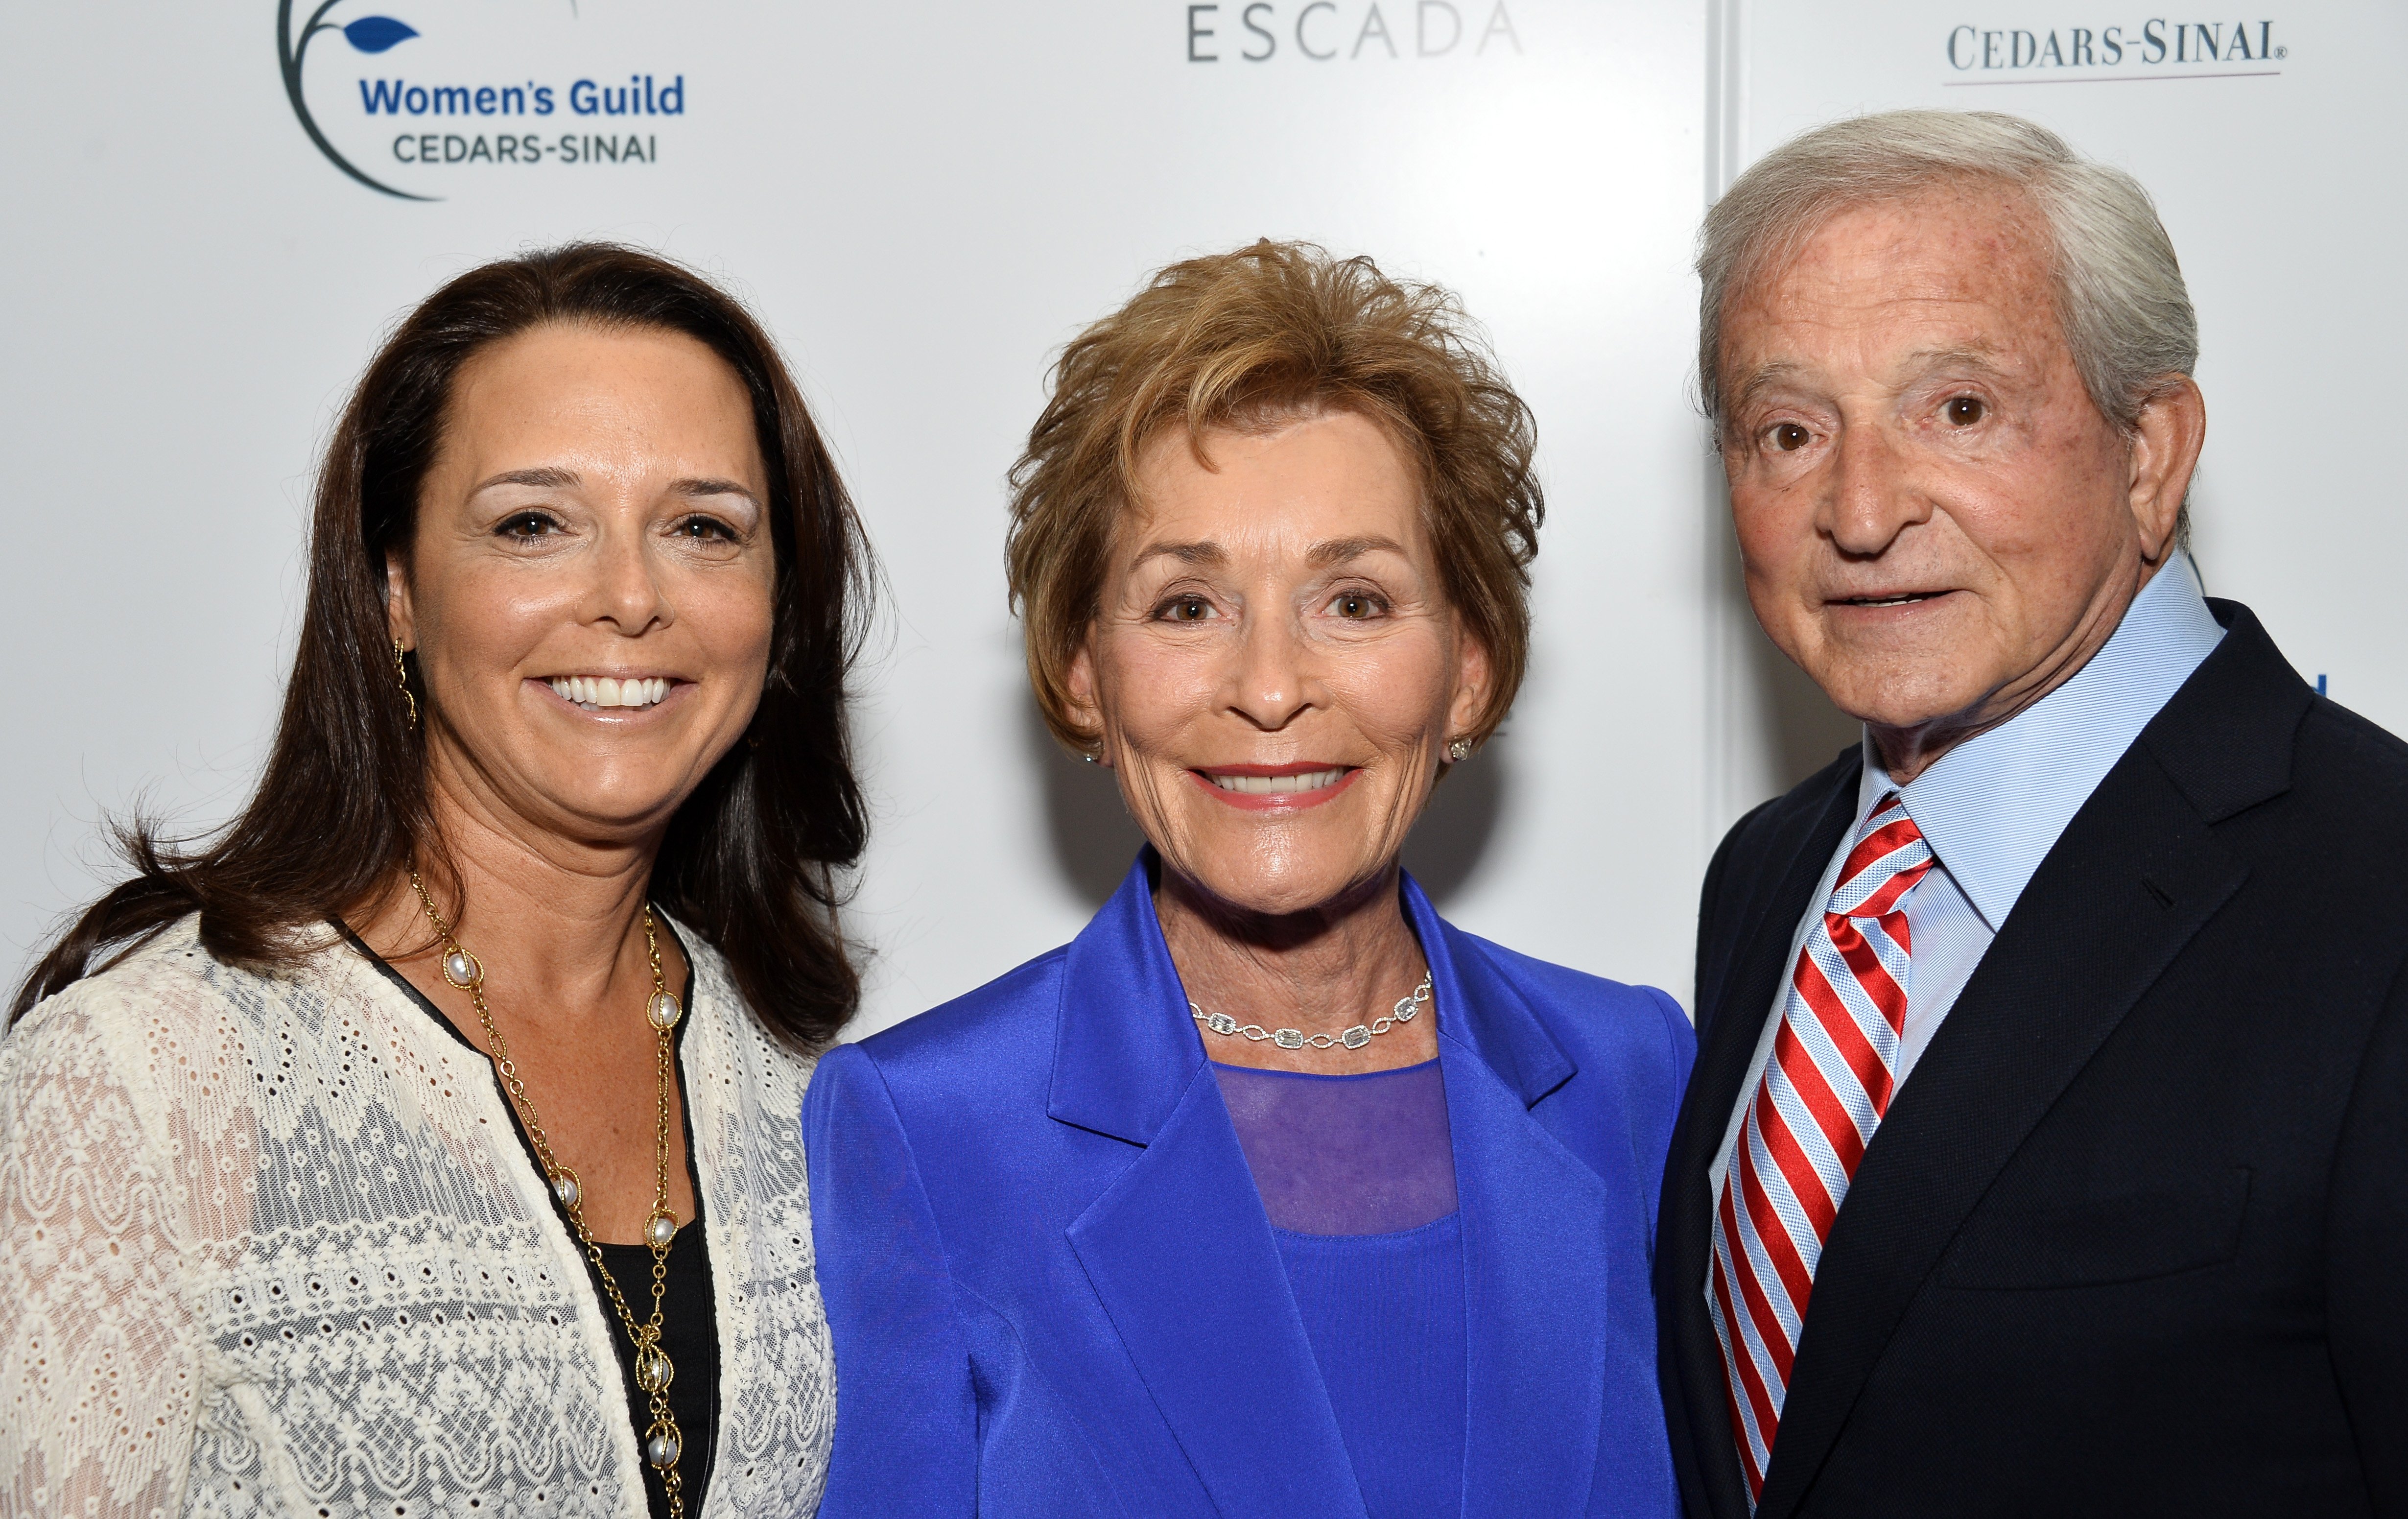 Nicole, Judy, and Jerry Sheindlin at the Women's Guild Cedars-Sinai's Annual Luncheon on April 13, 2015, in Beverly Hills, California | Source: Getty Images